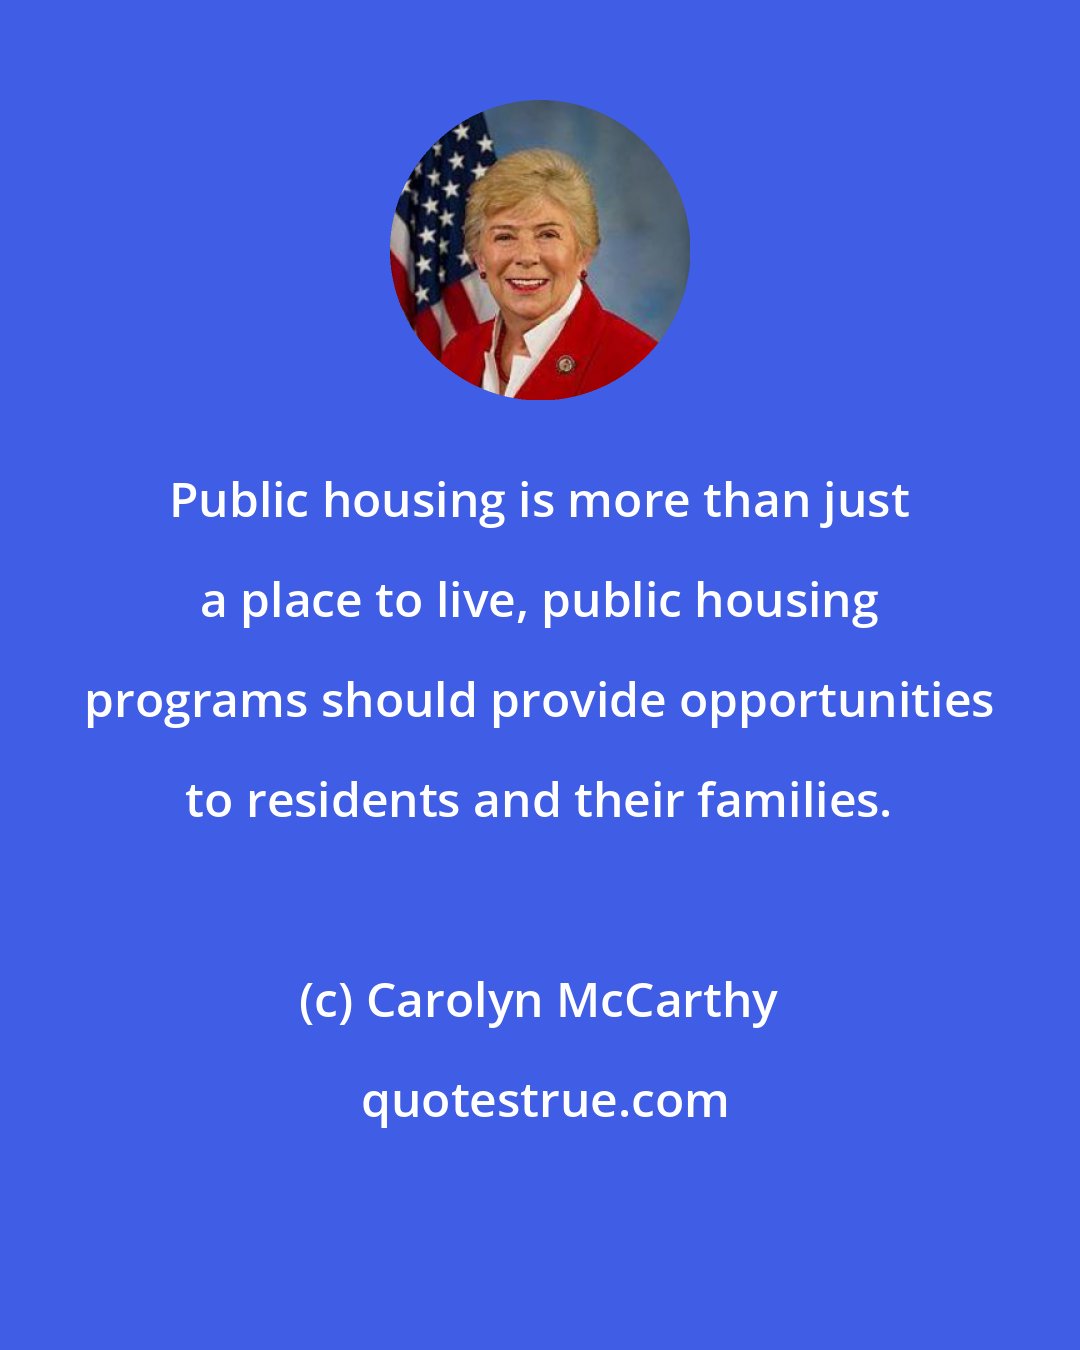 Carolyn McCarthy: Public housing is more than just a place to live, public housing programs should provide opportunities to residents and their families.